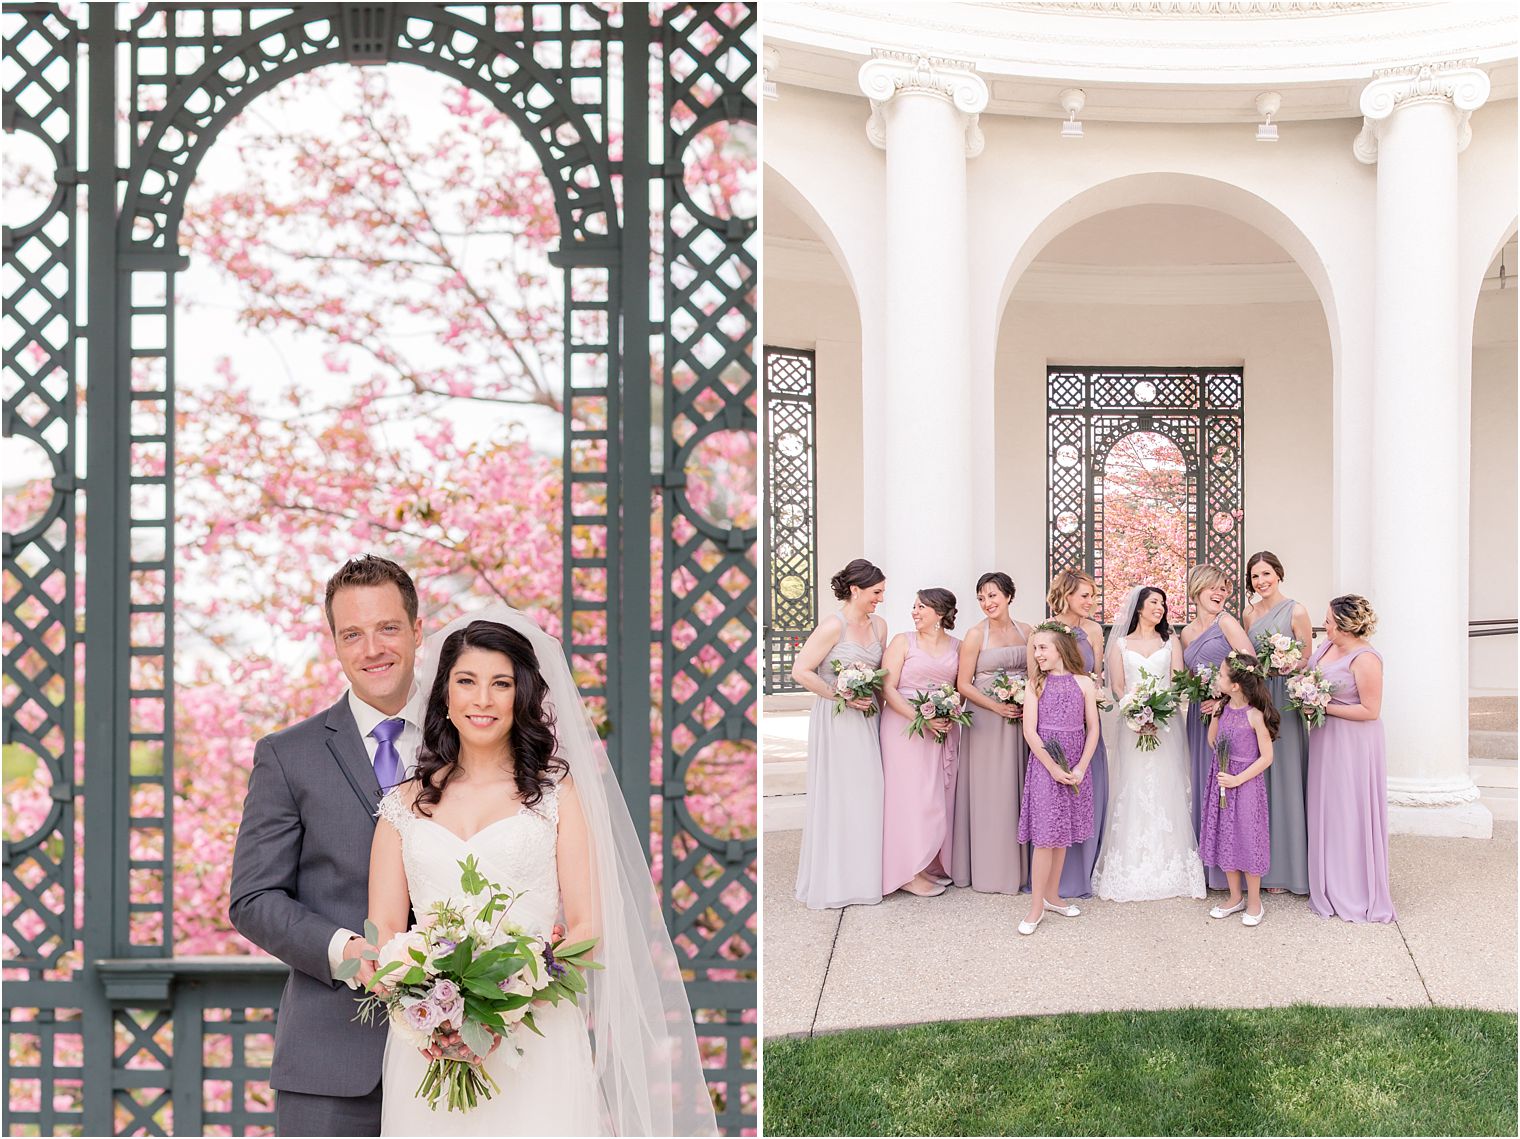 Spring wedding with cherry blossoms